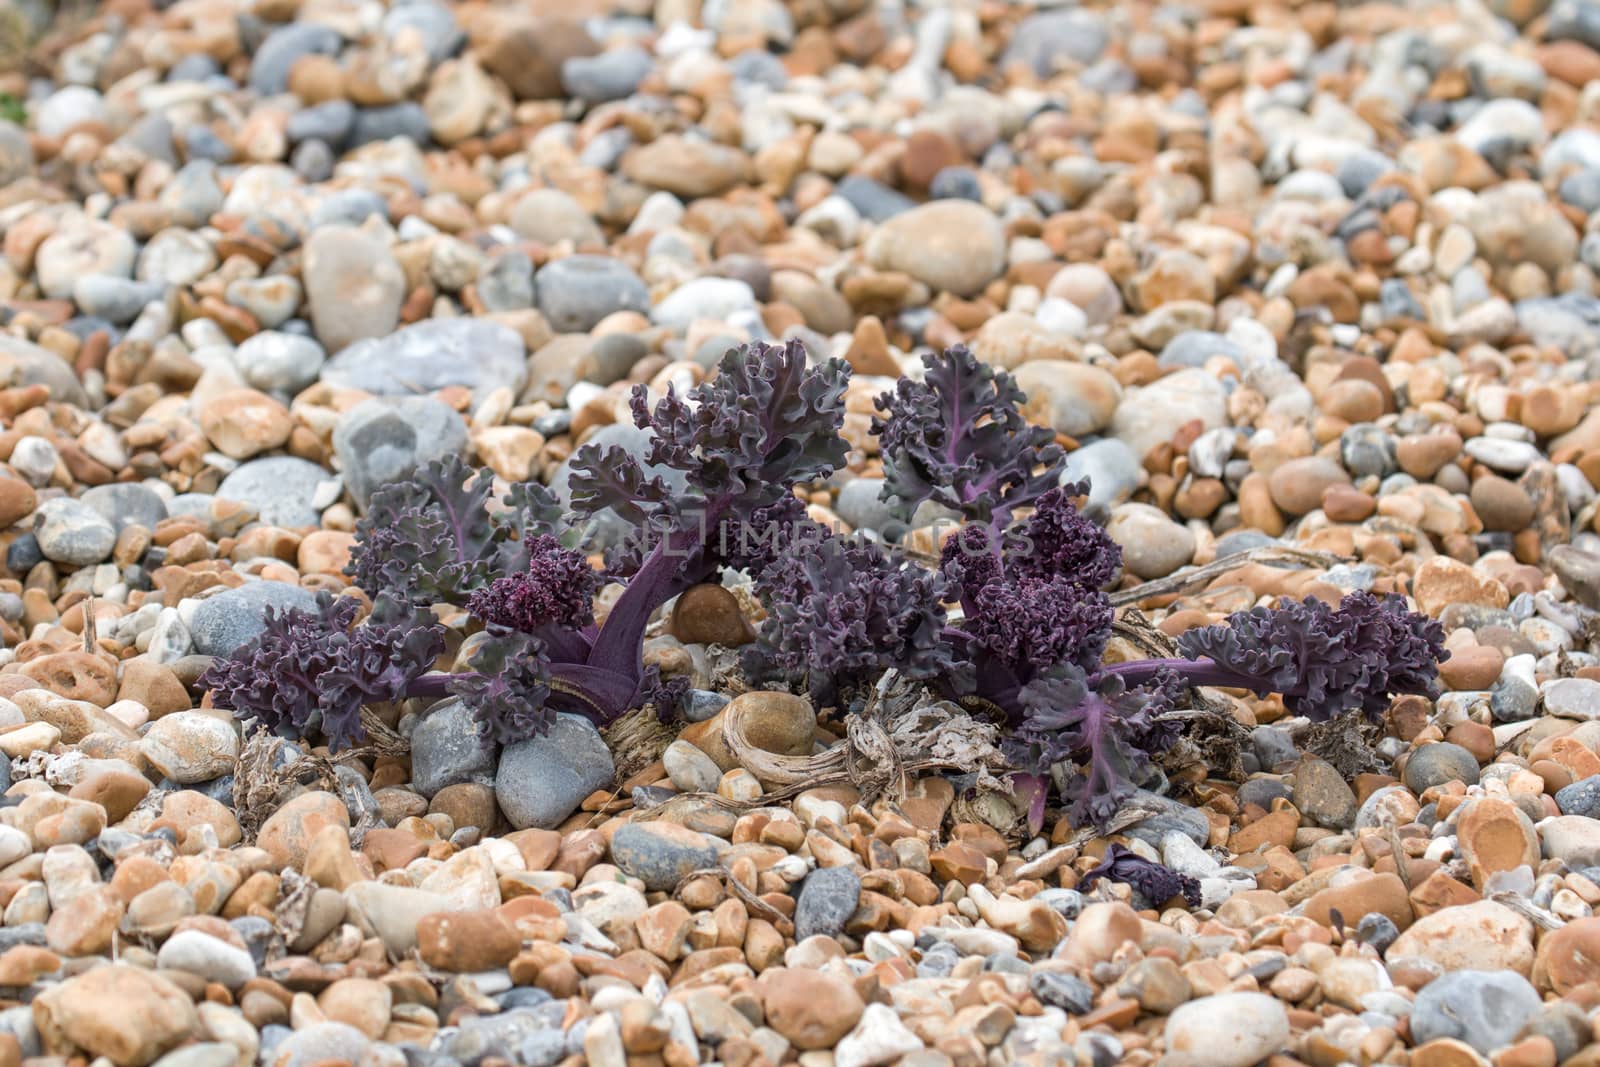 Newly-sprouted Sea Kale on pebble beach in East Sussex.